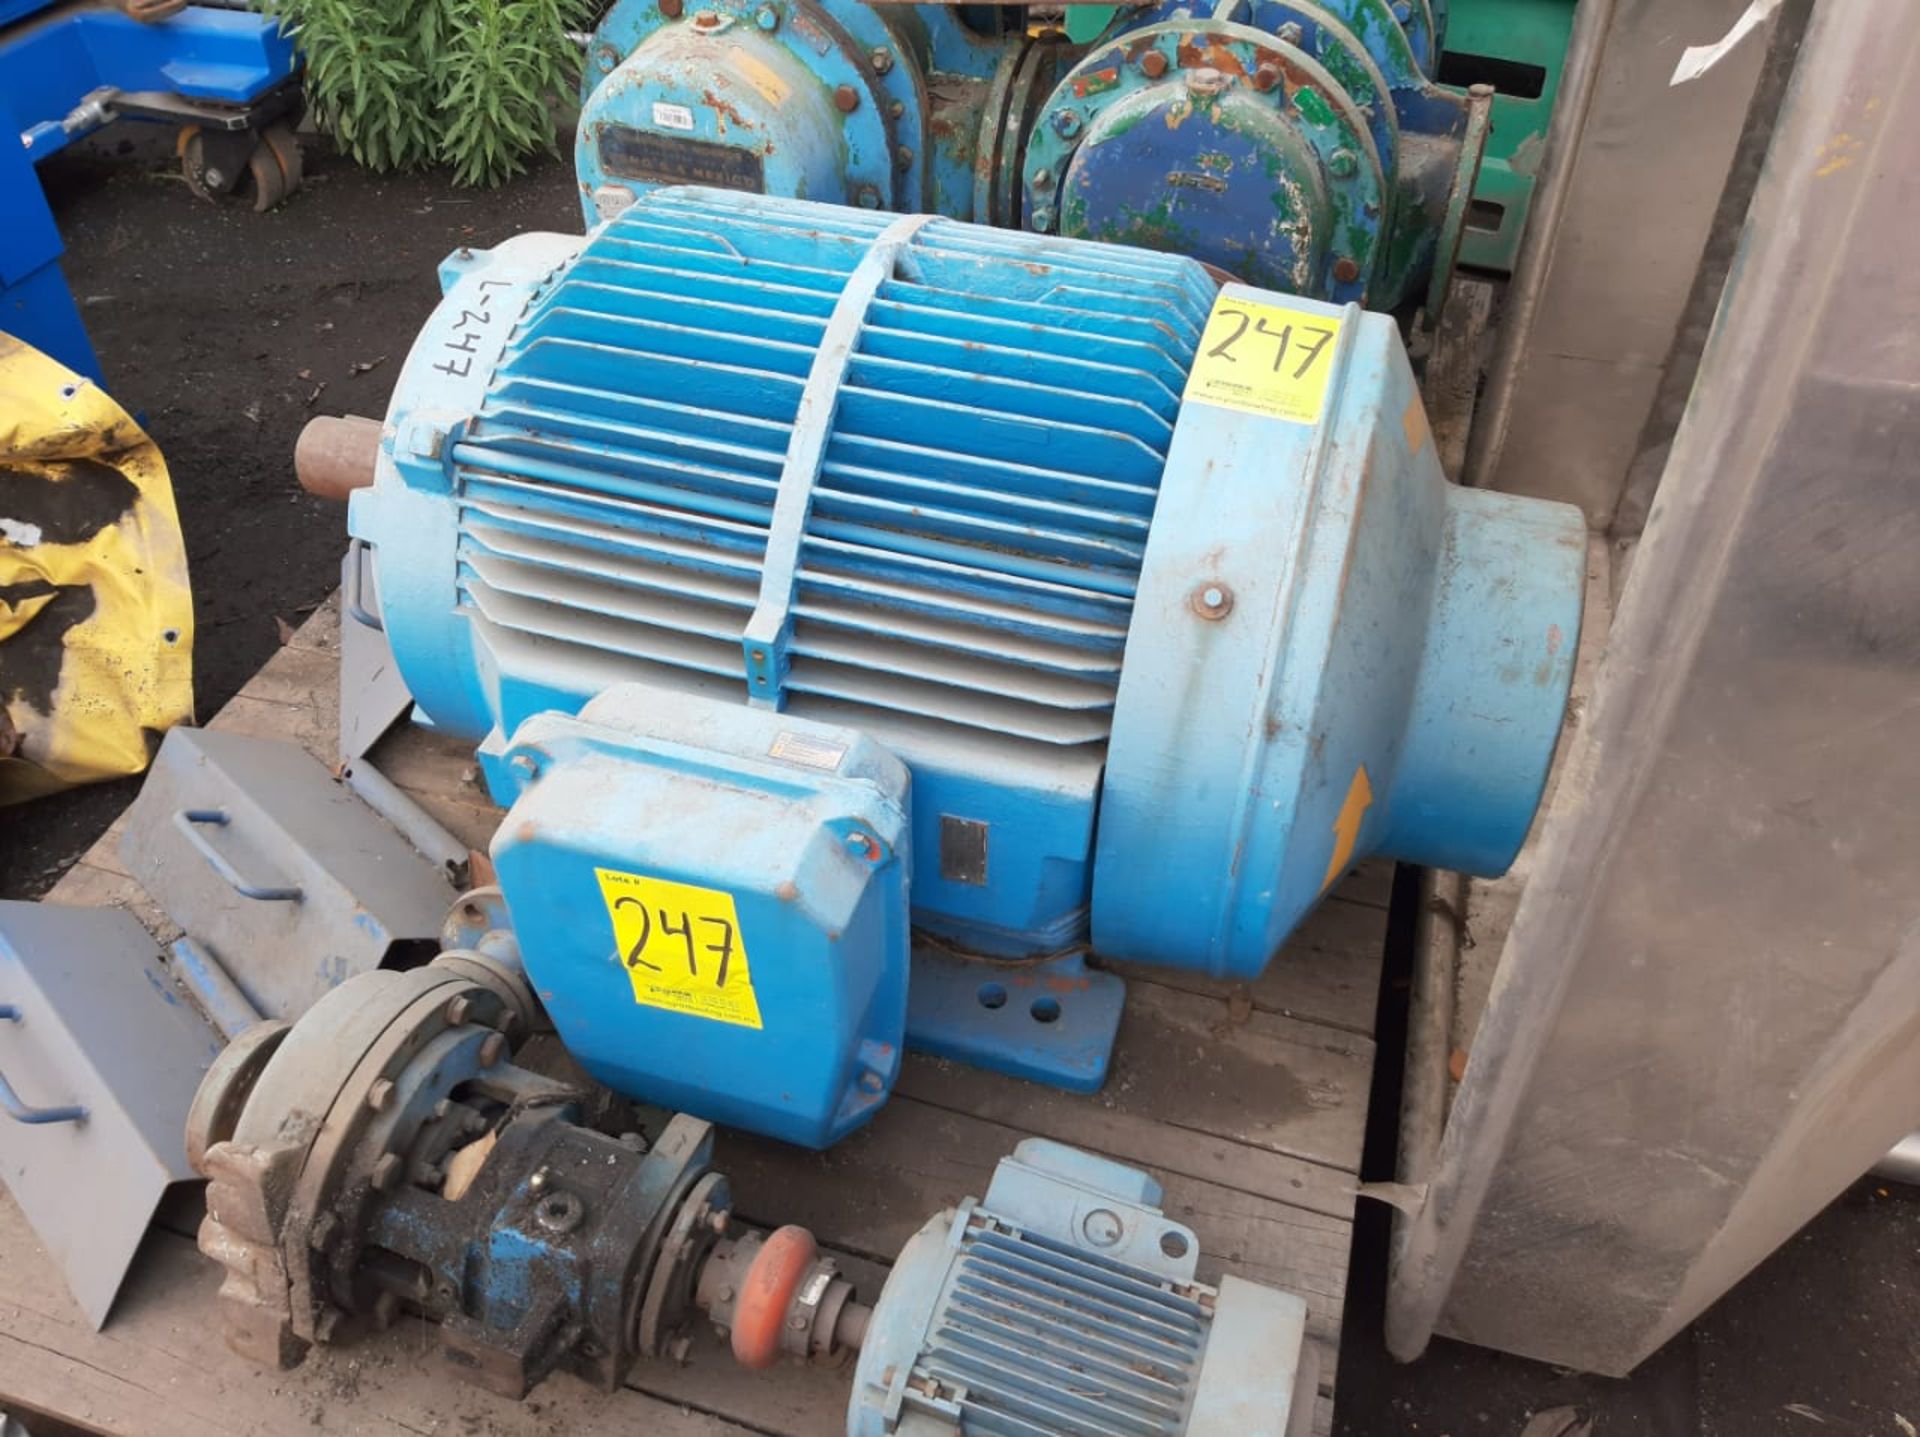 Electric motor Serie 85875-18/1, 110 HP, 1790 RPM - Image 2 of 6